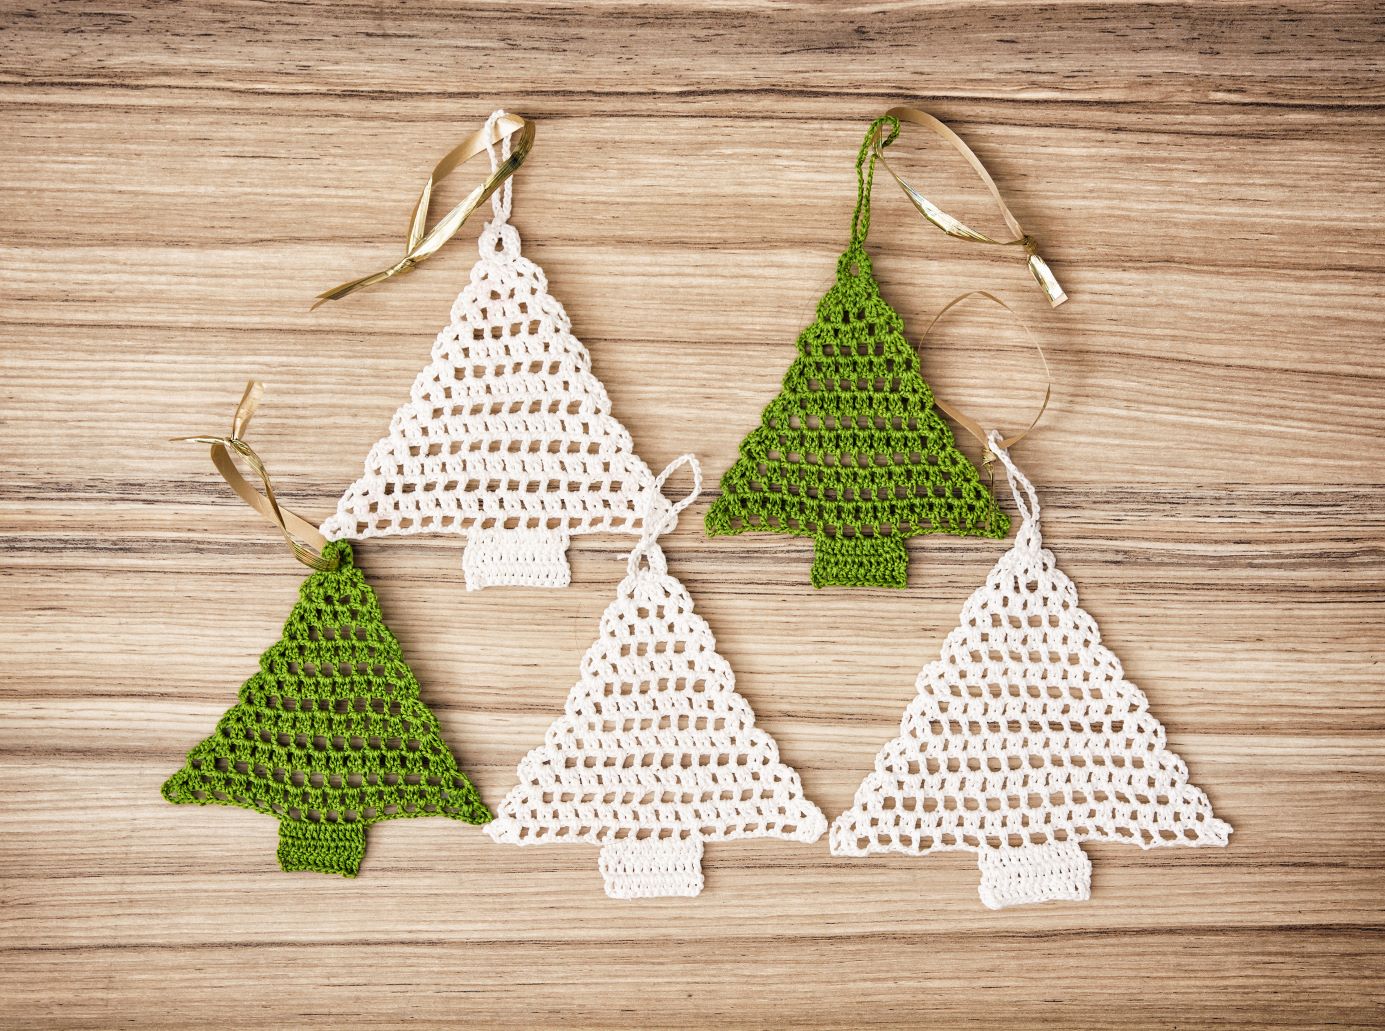 Decorating for the Holidays with a Crochet Christmas Tree